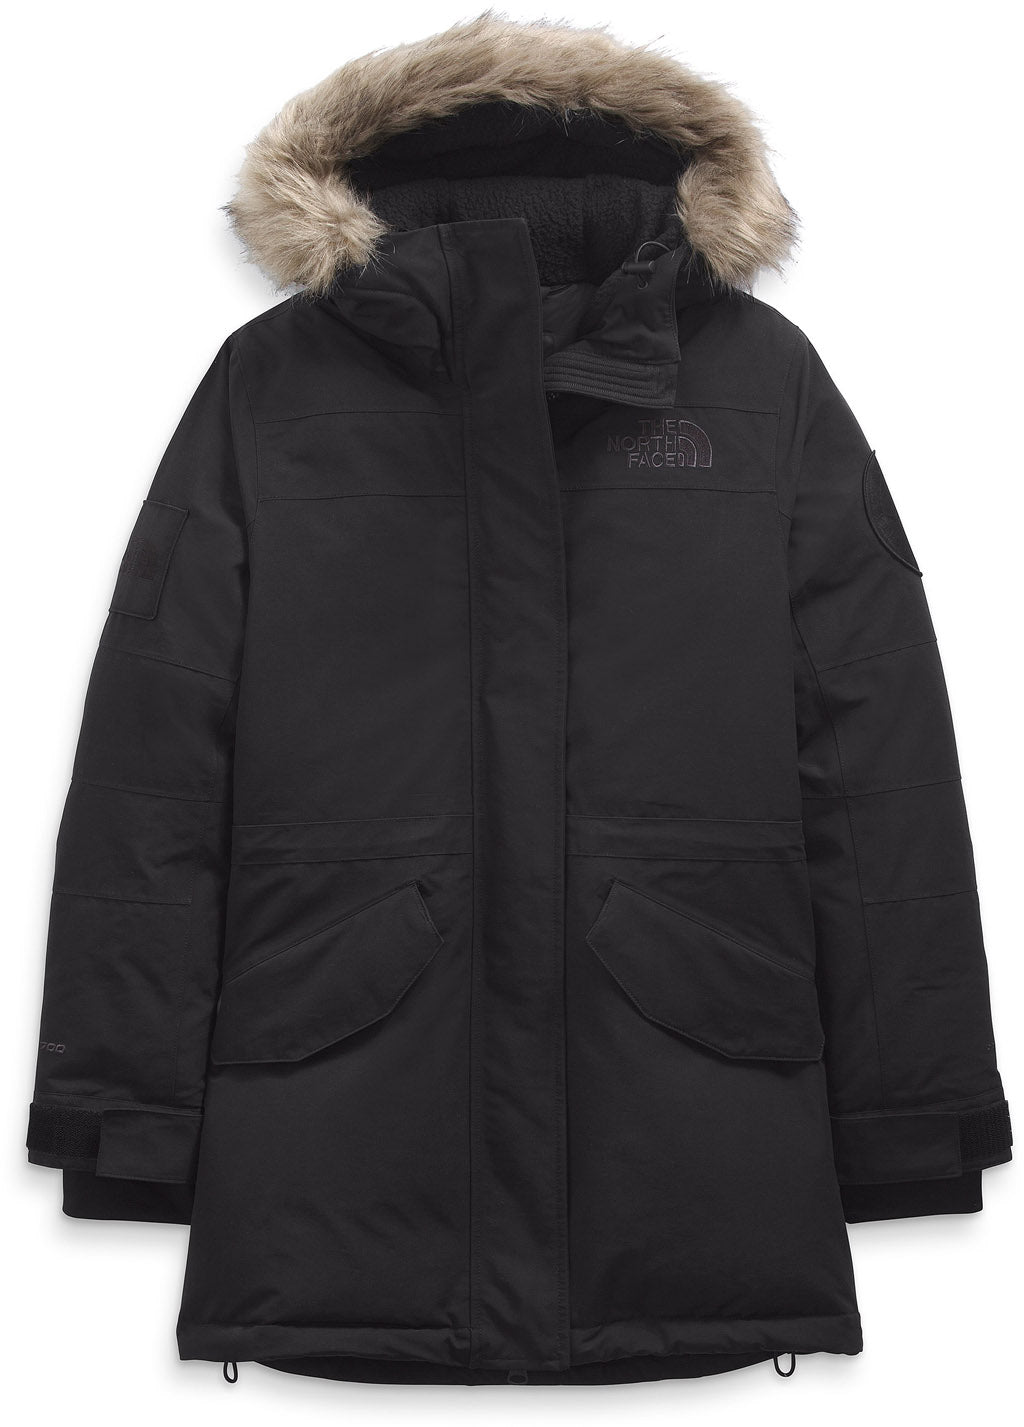 The North Face Expedition Mcmurdo Parka - Women’s | Altitude Sports